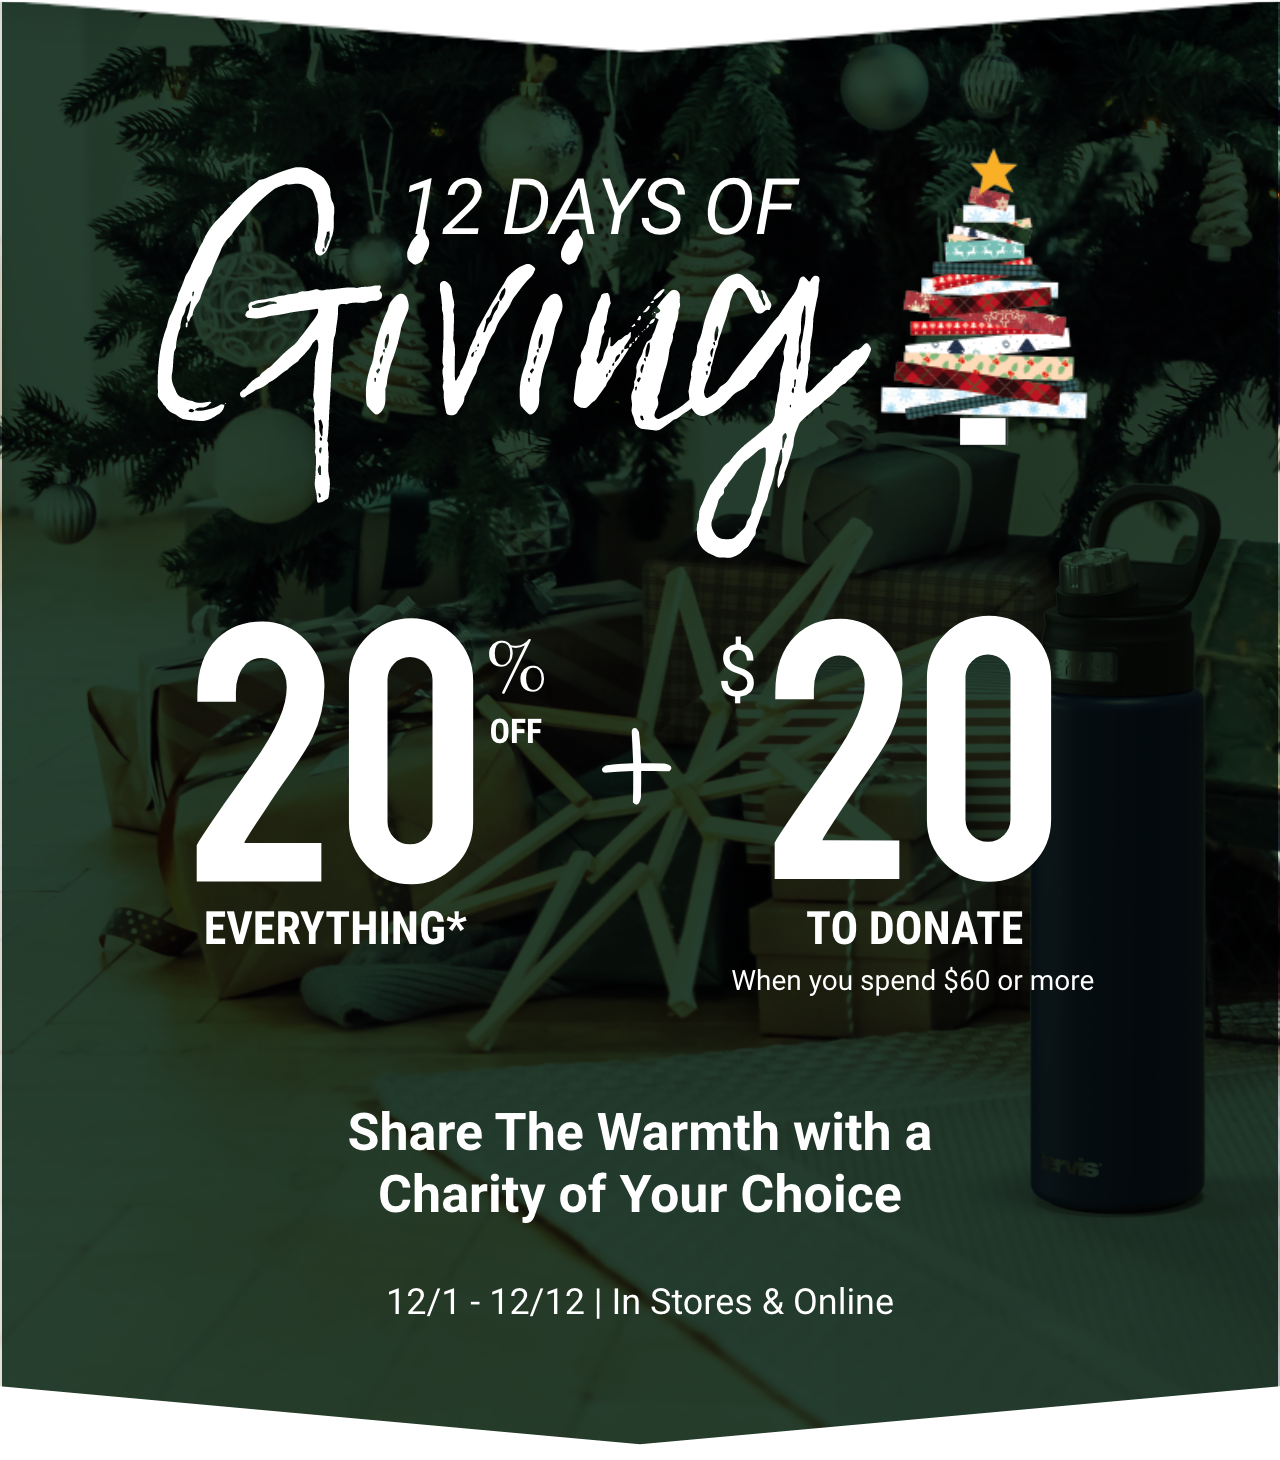 12 Days of Giving. 20% off everything plus $20 to donate when you spend $60 or more. Share the warmth with a charity of your choice from 12/1 to 12/12 in stores and online.